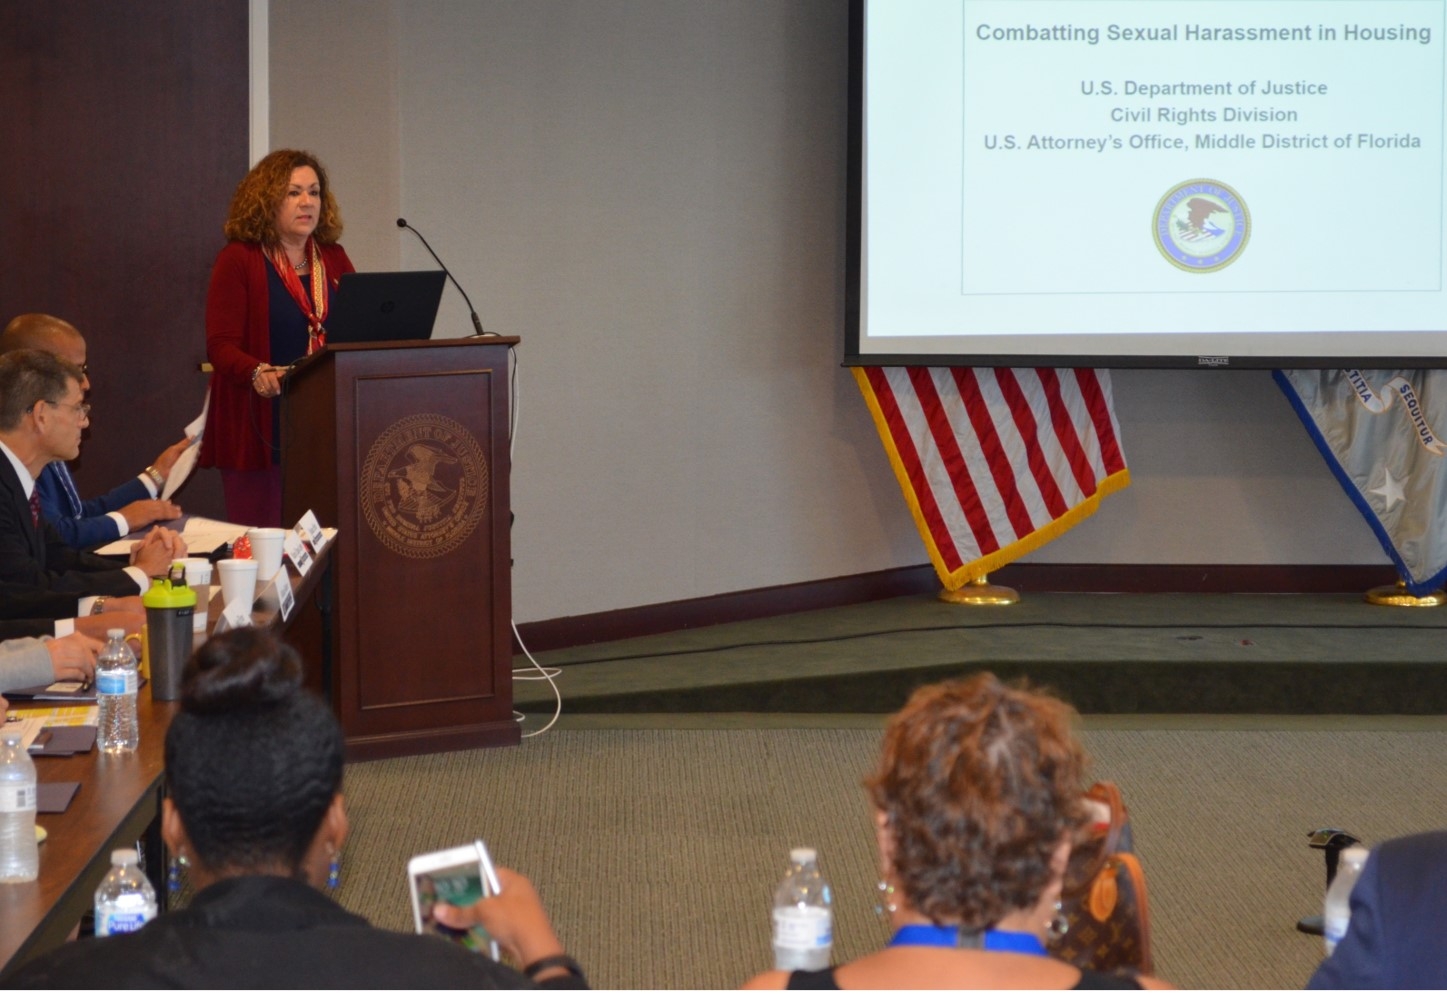 U.S. Attorney Maria Chapa Lopez welcomes attendees